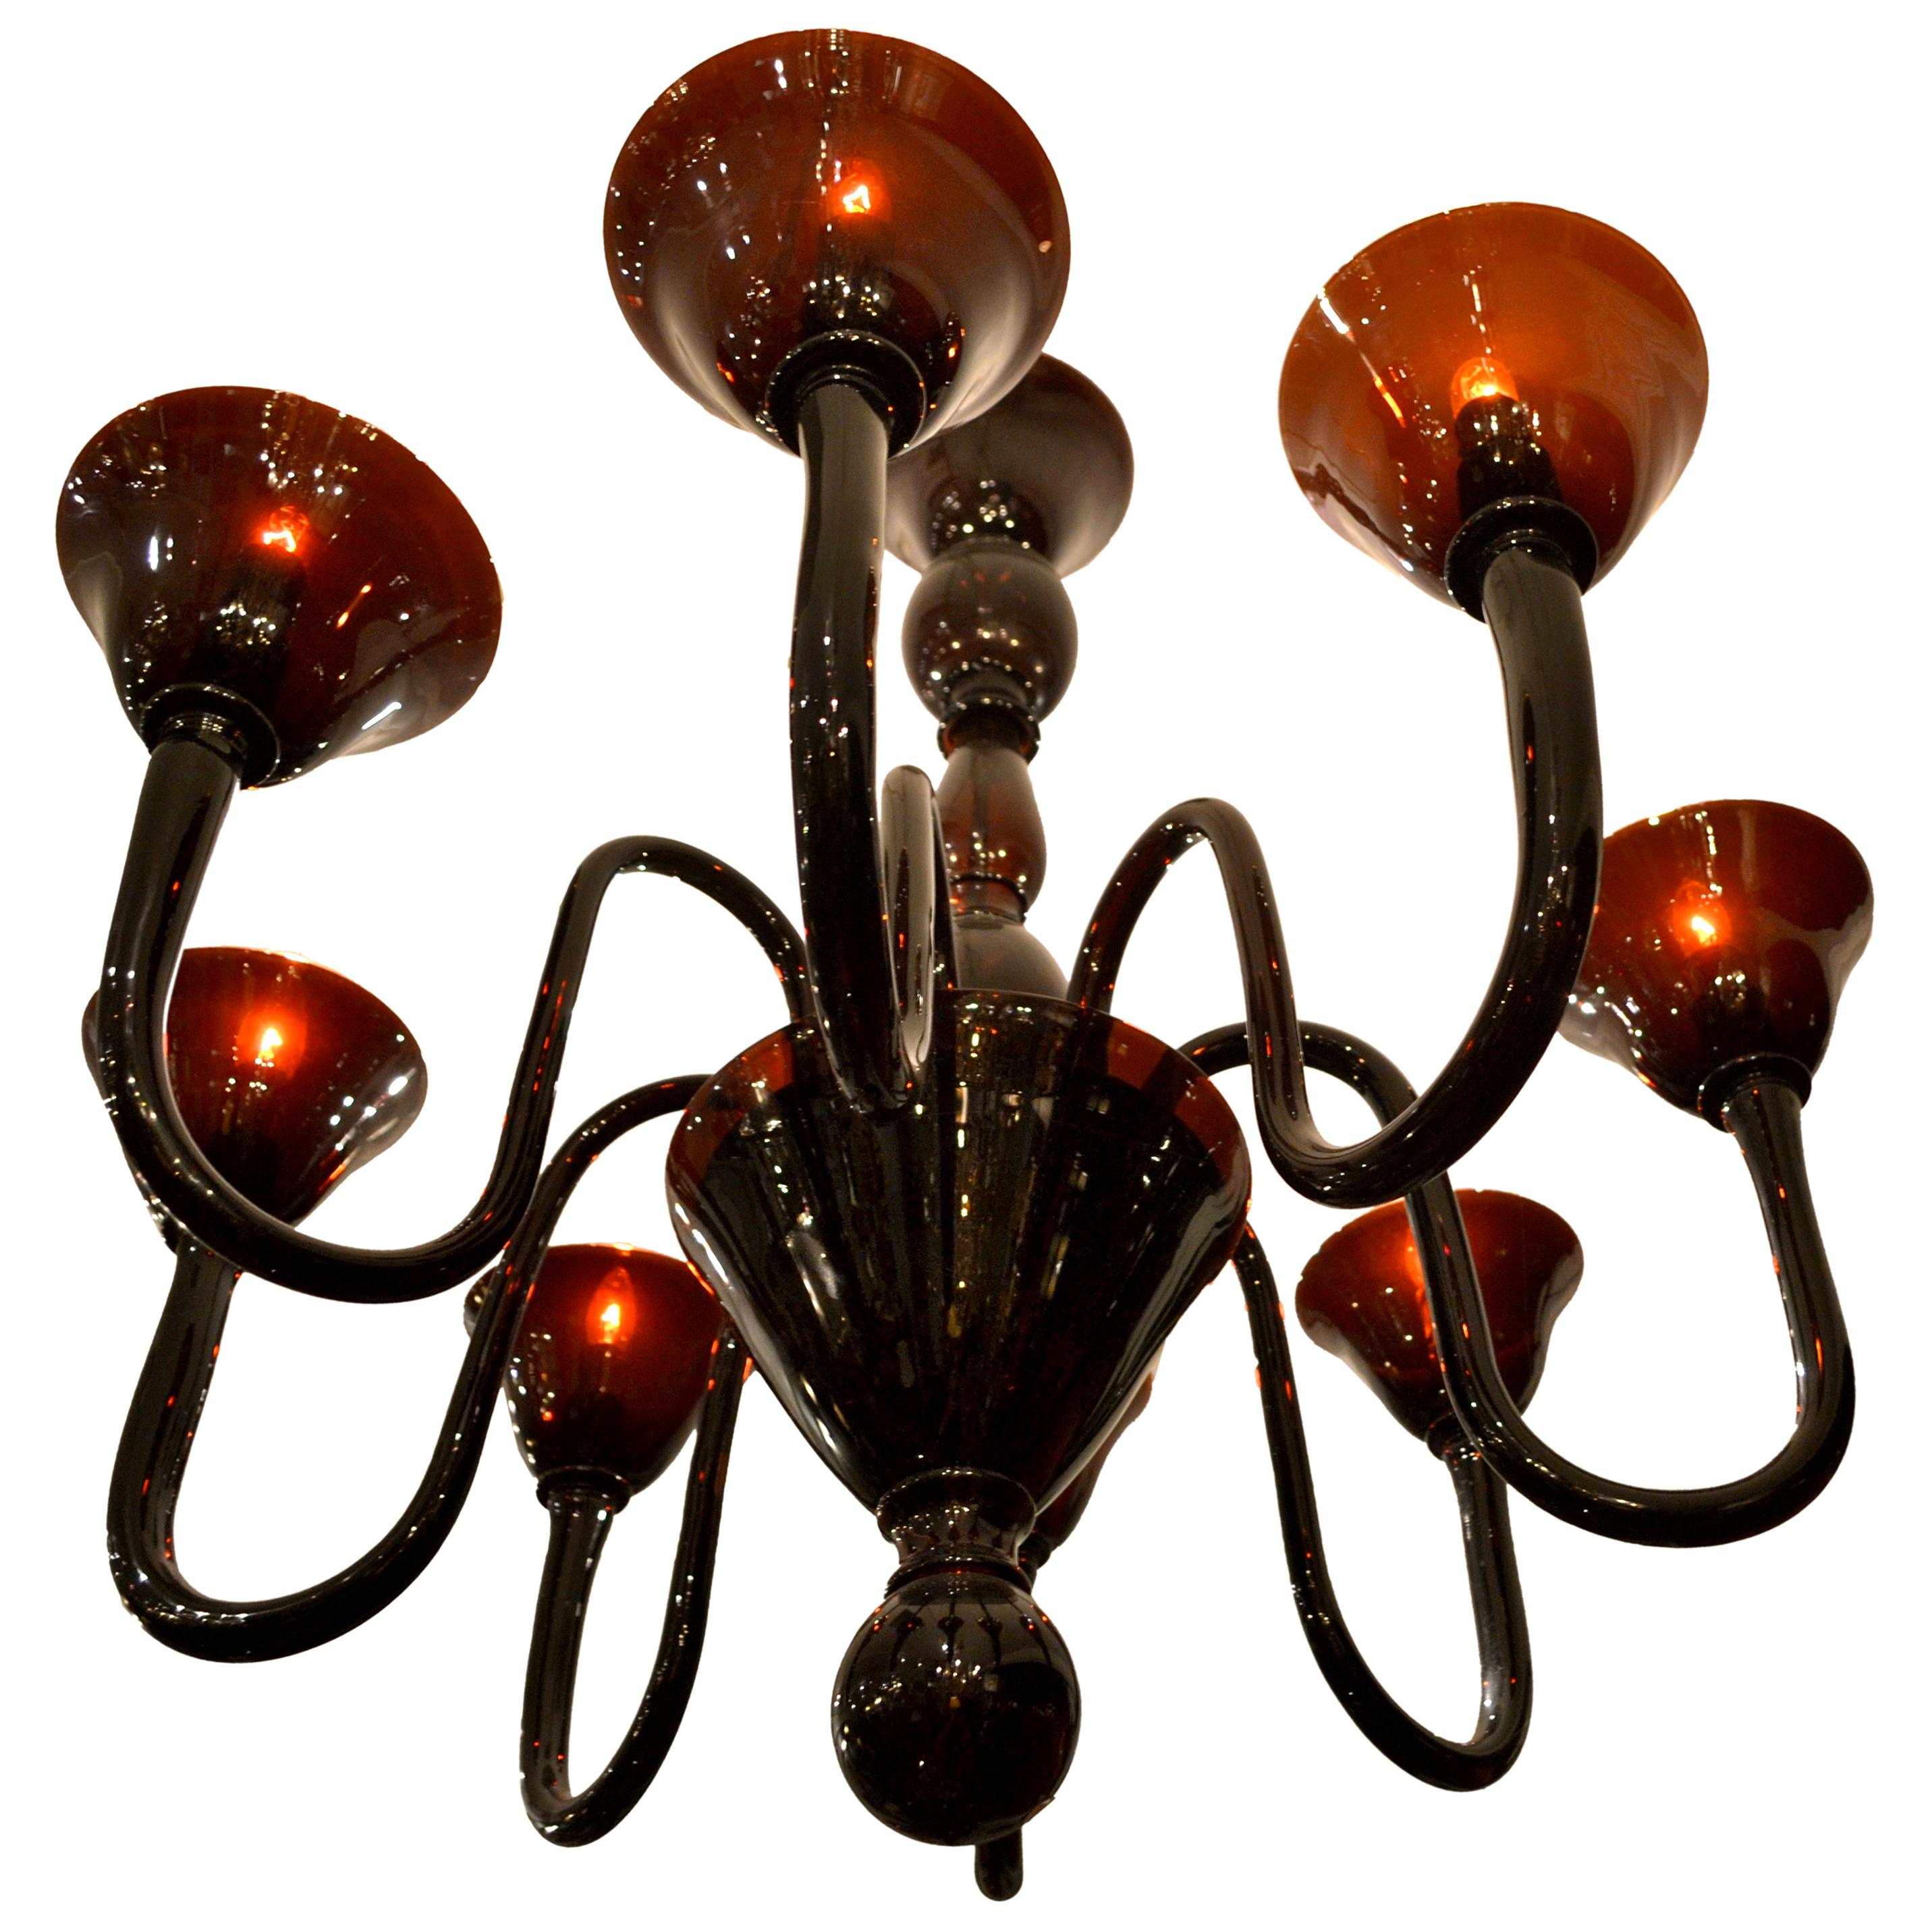 A Classic chandelier from Murano, Italy featuring eight hand blown arms and ‘shades’ connected to a central blown glass stem, the wiring concealed by a gilded metal internal bowl cased in a blown glass ‘shade’ with a suspended glass